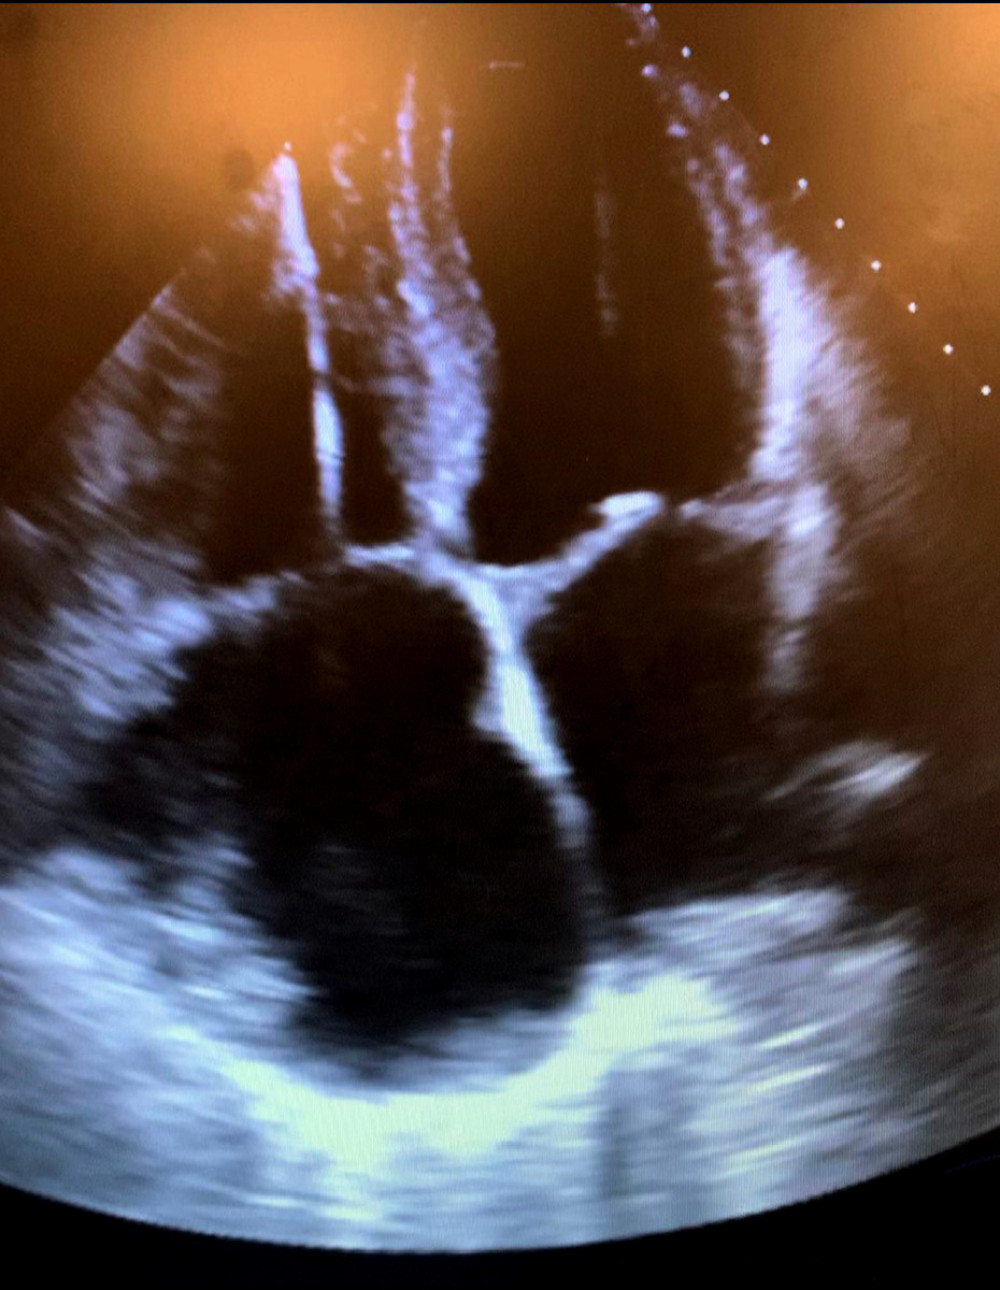 Case 1: Cardiac echography showing resolution of right atrial thrombi after thrombolytic therapy.